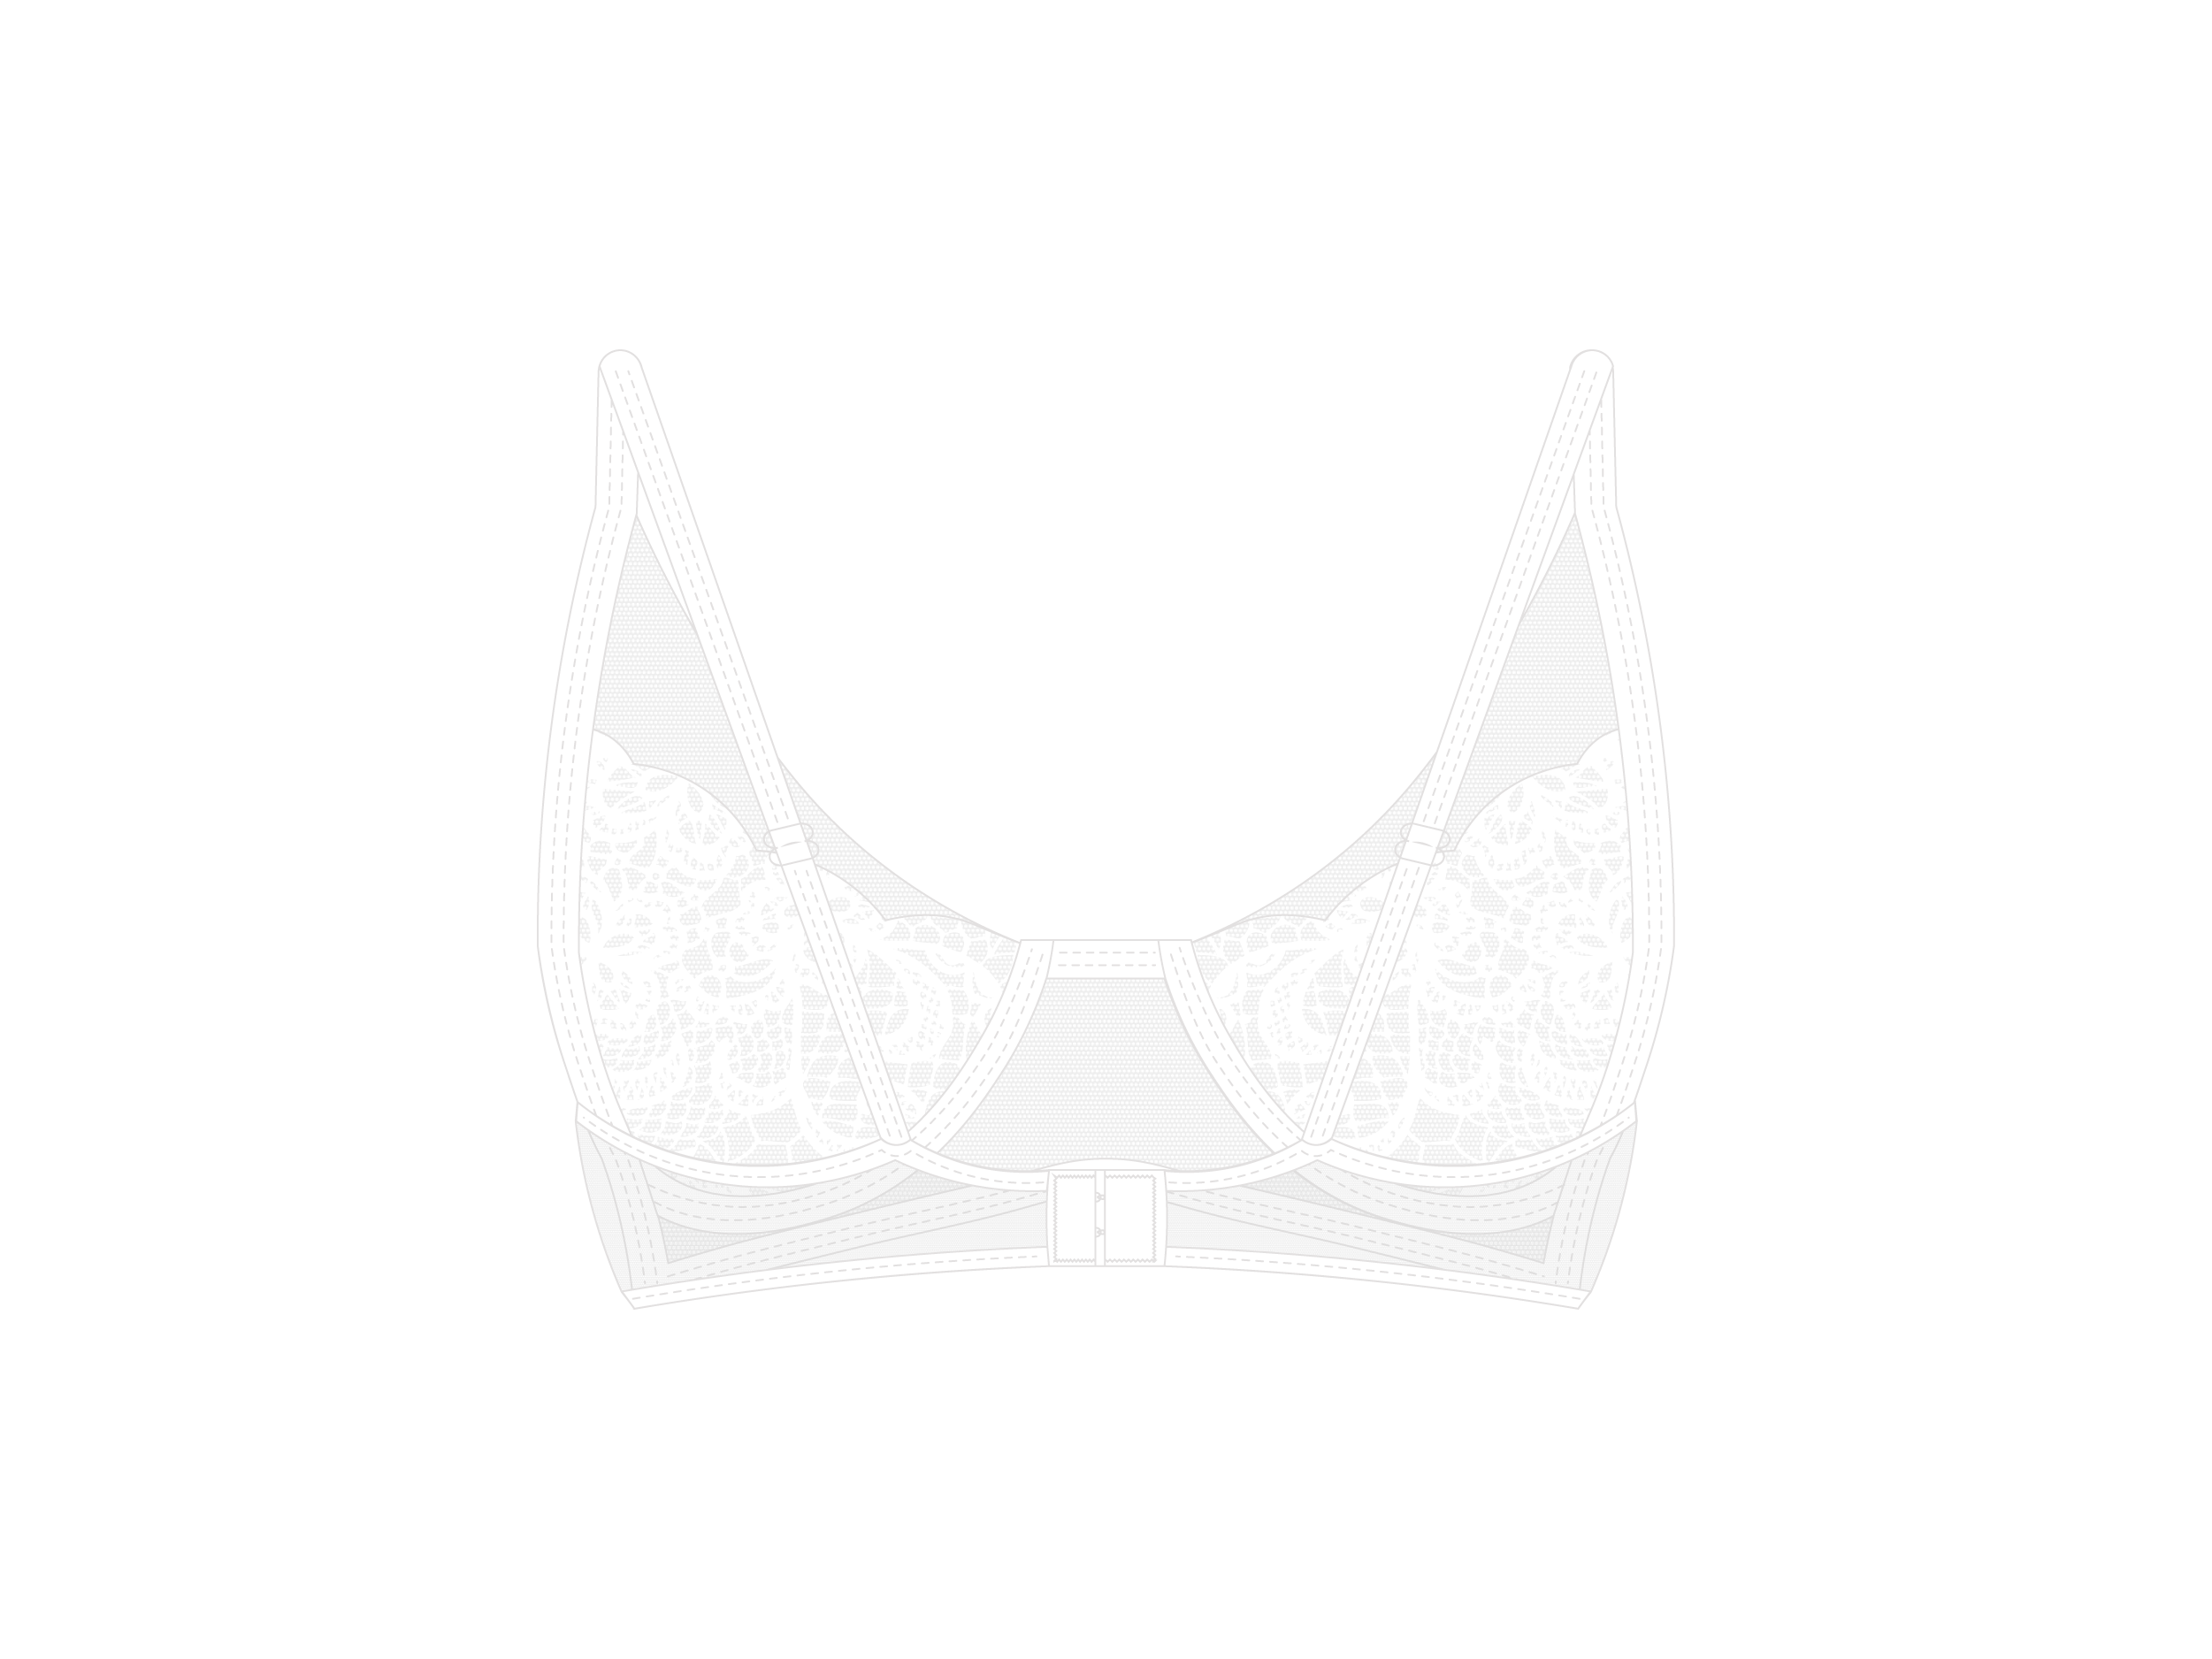 Boutine La lace bra new!!, This bra is so cute but